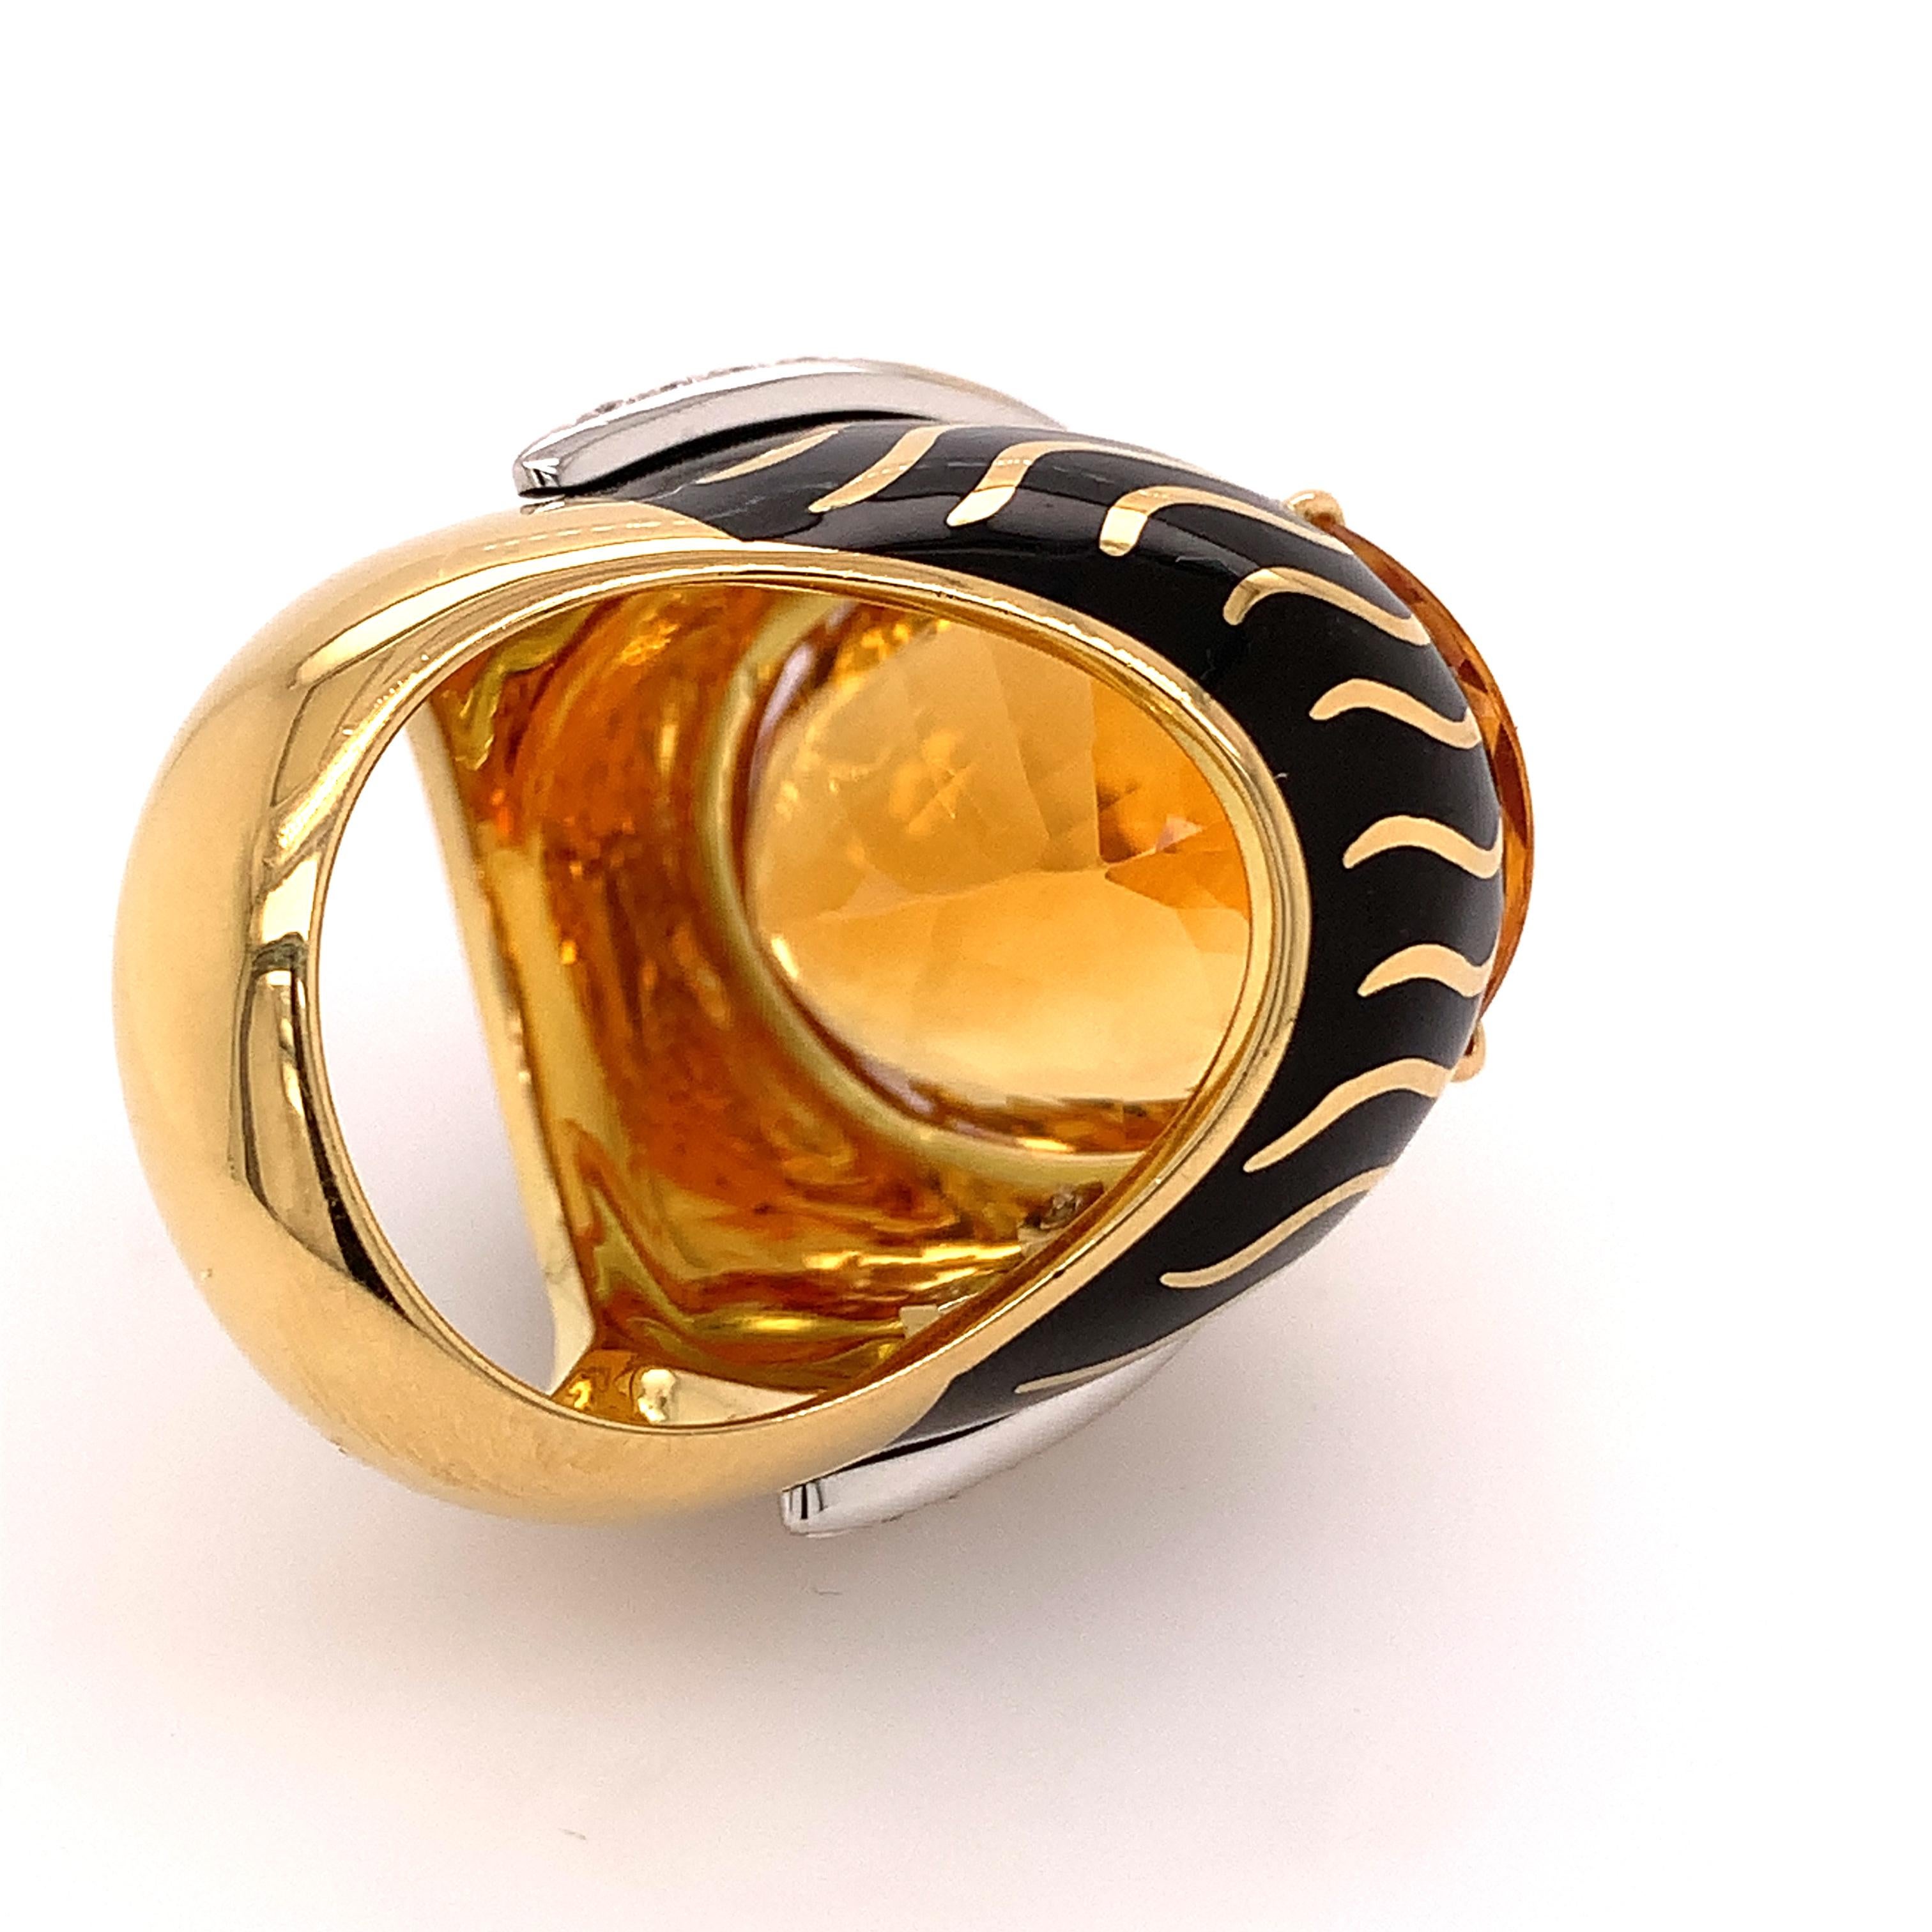 18kt Gold One of a Kind Ring with 29.15 Ct Citrine and Diamonds, Animalier Look 1